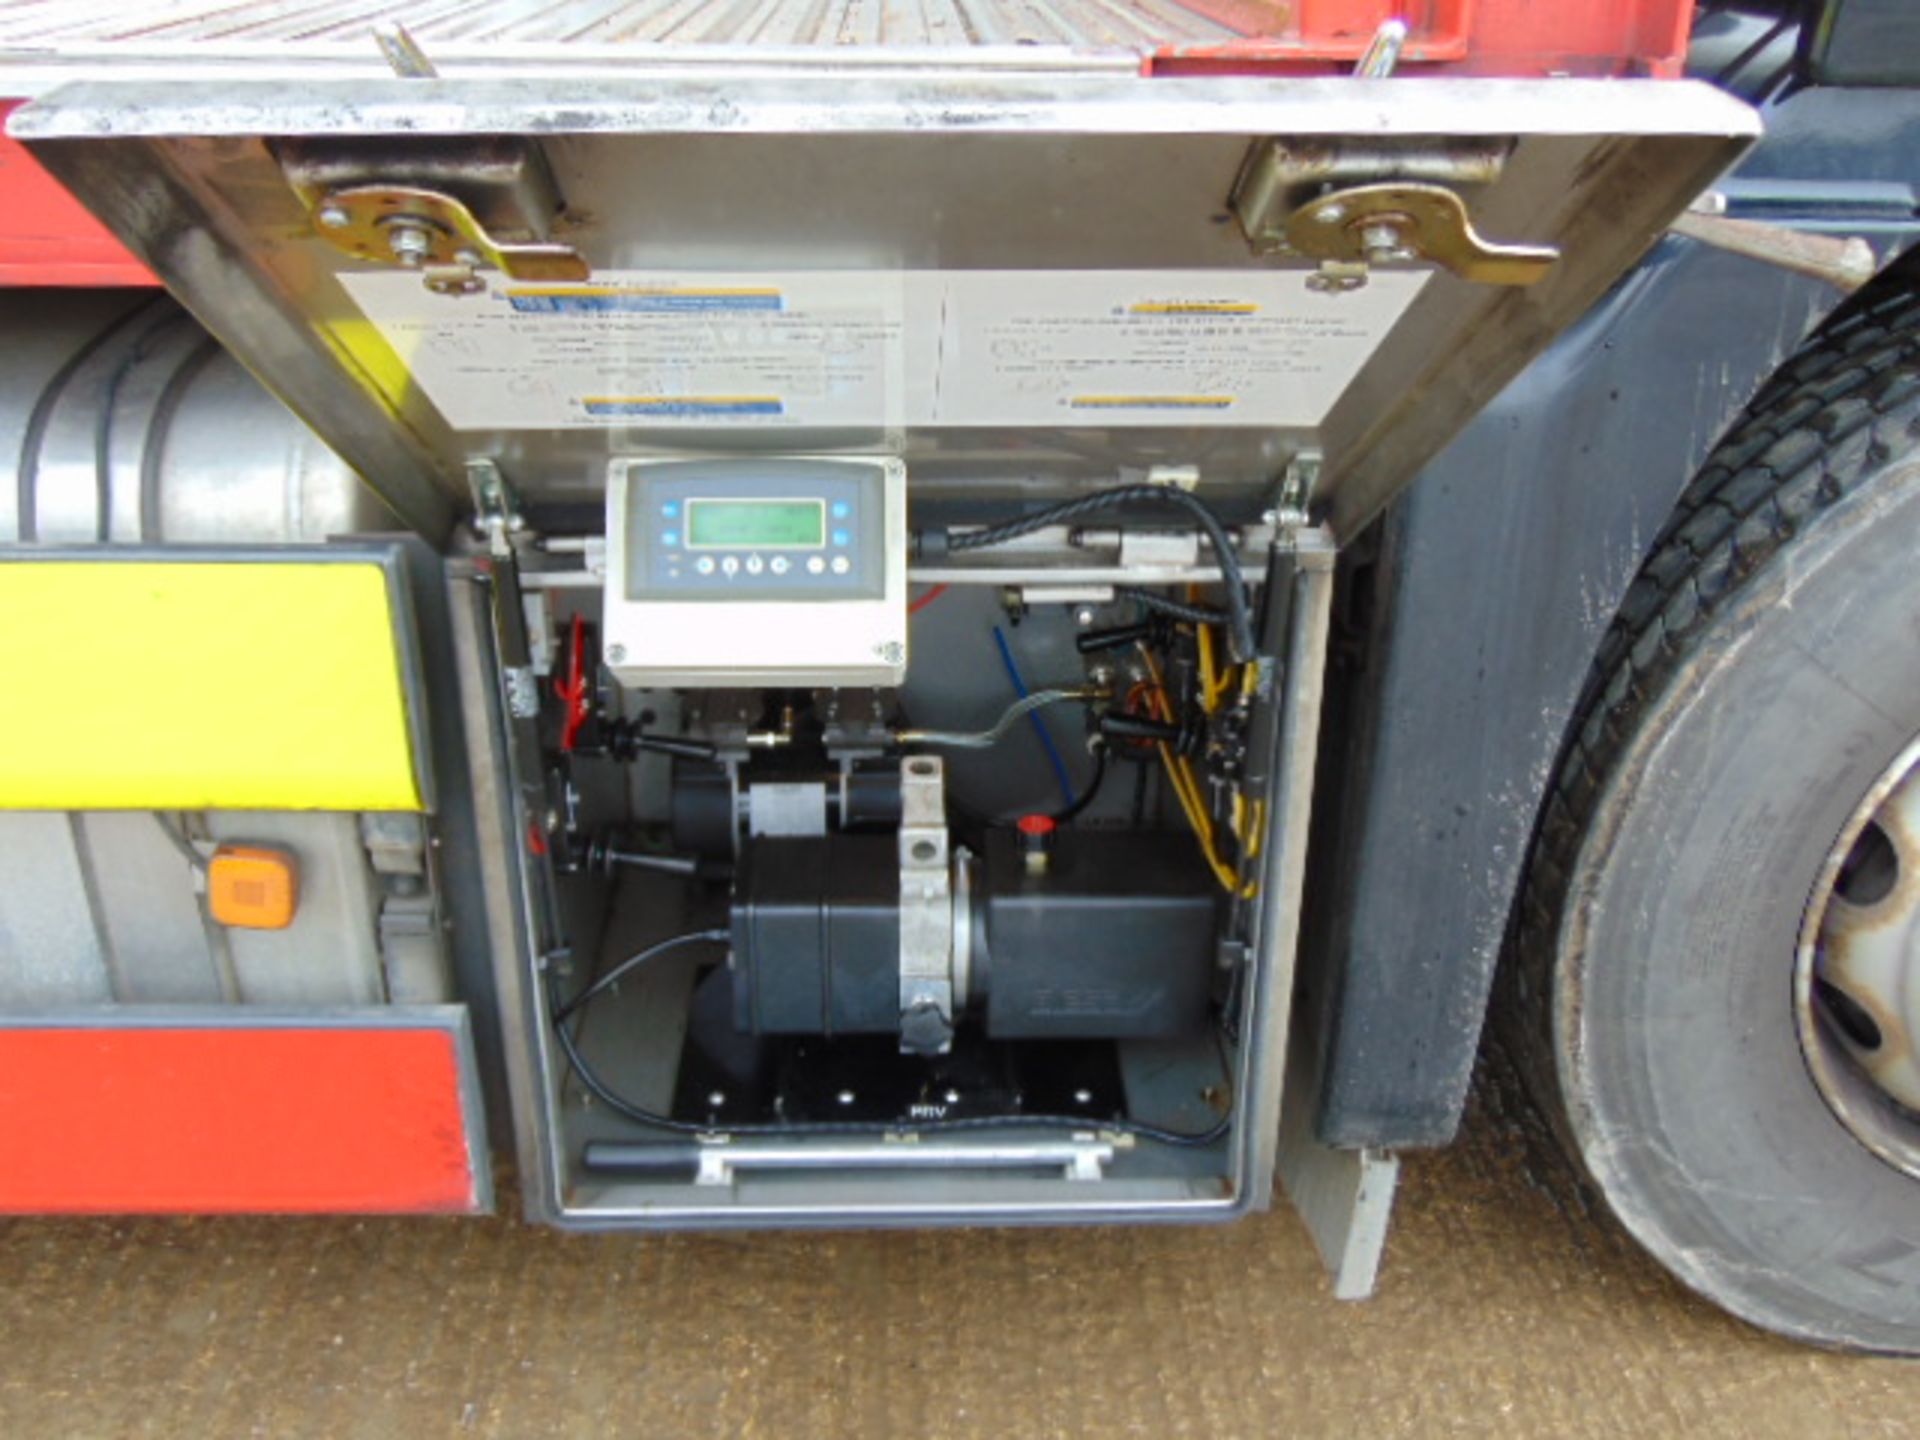 2004 MAN TG-A 6x2 Incident Support Unit - Image 17 of 26